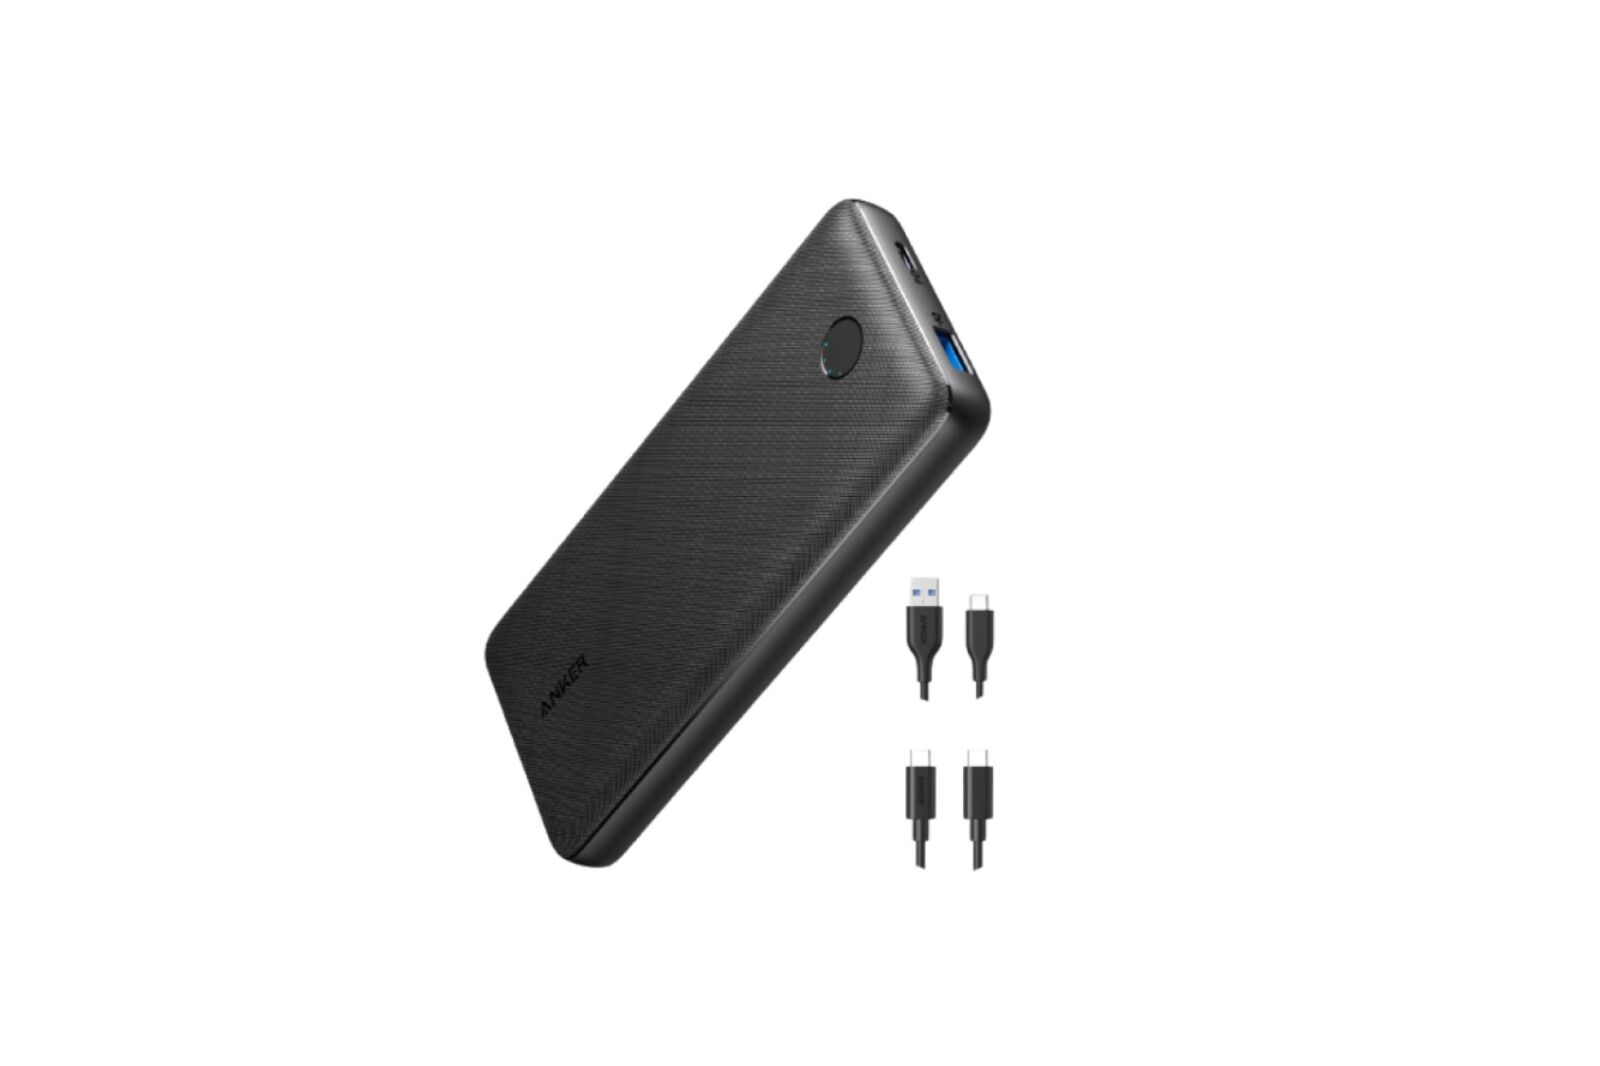 Anker portable charger
